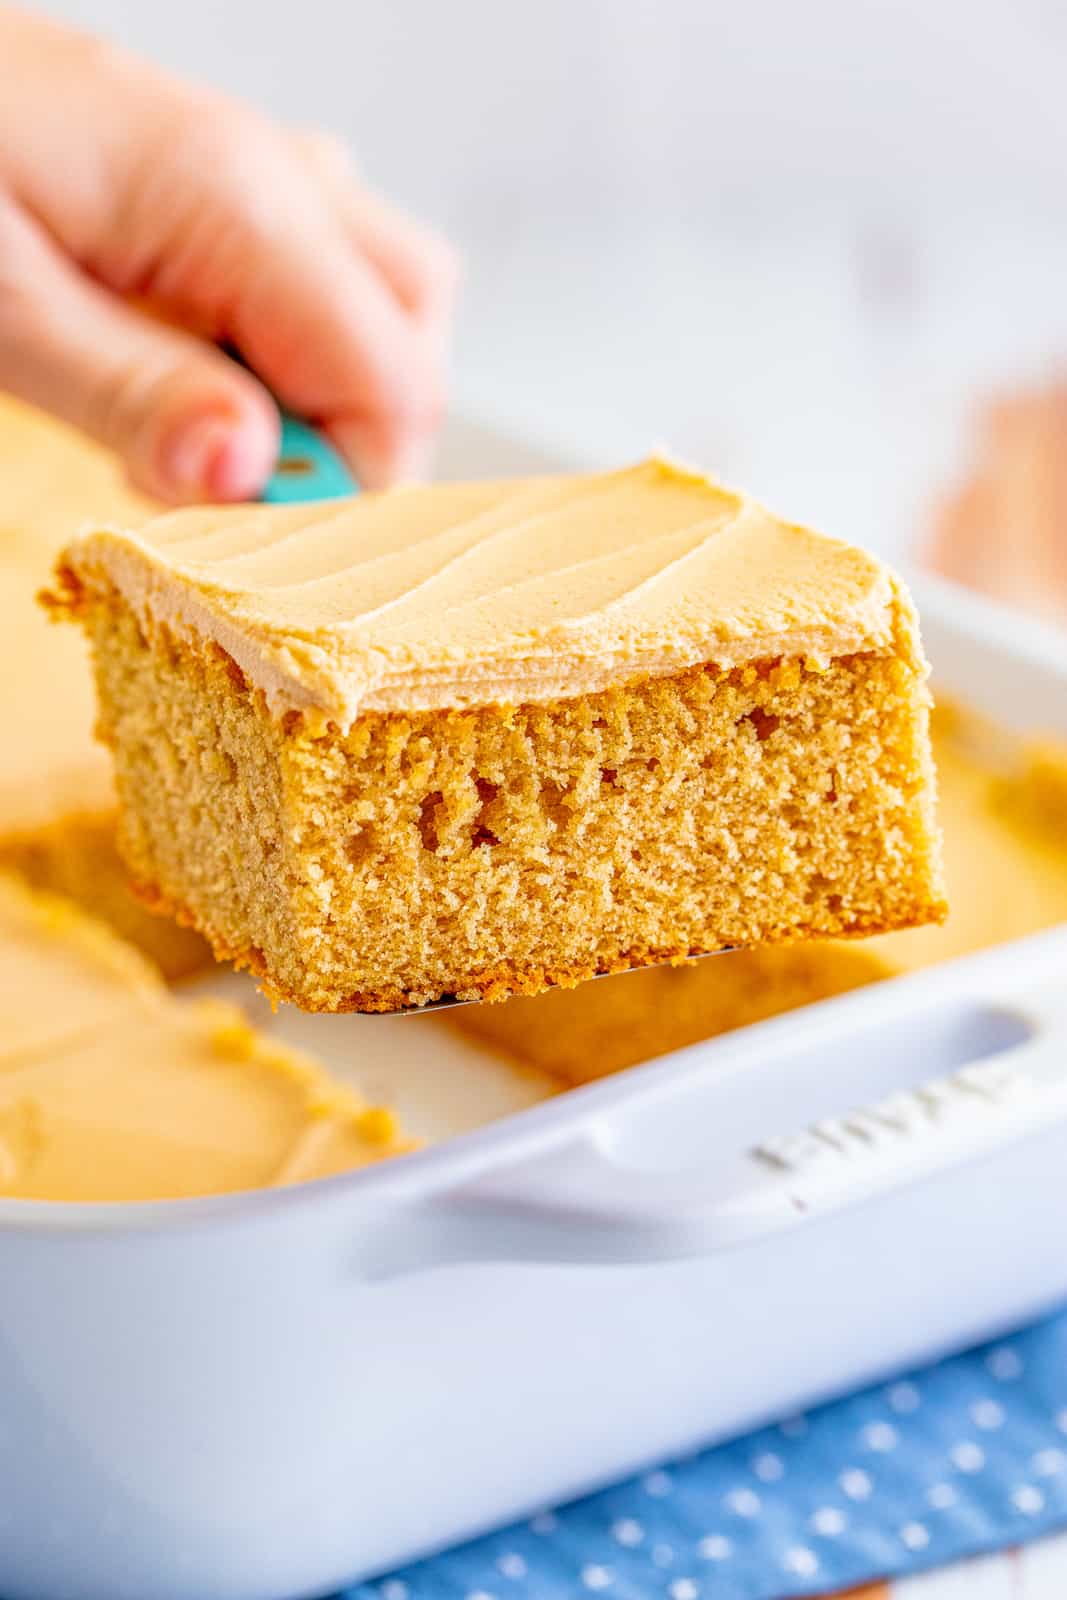 Cake server holding up a slice of Peanut Butter Cake out of baking pan.